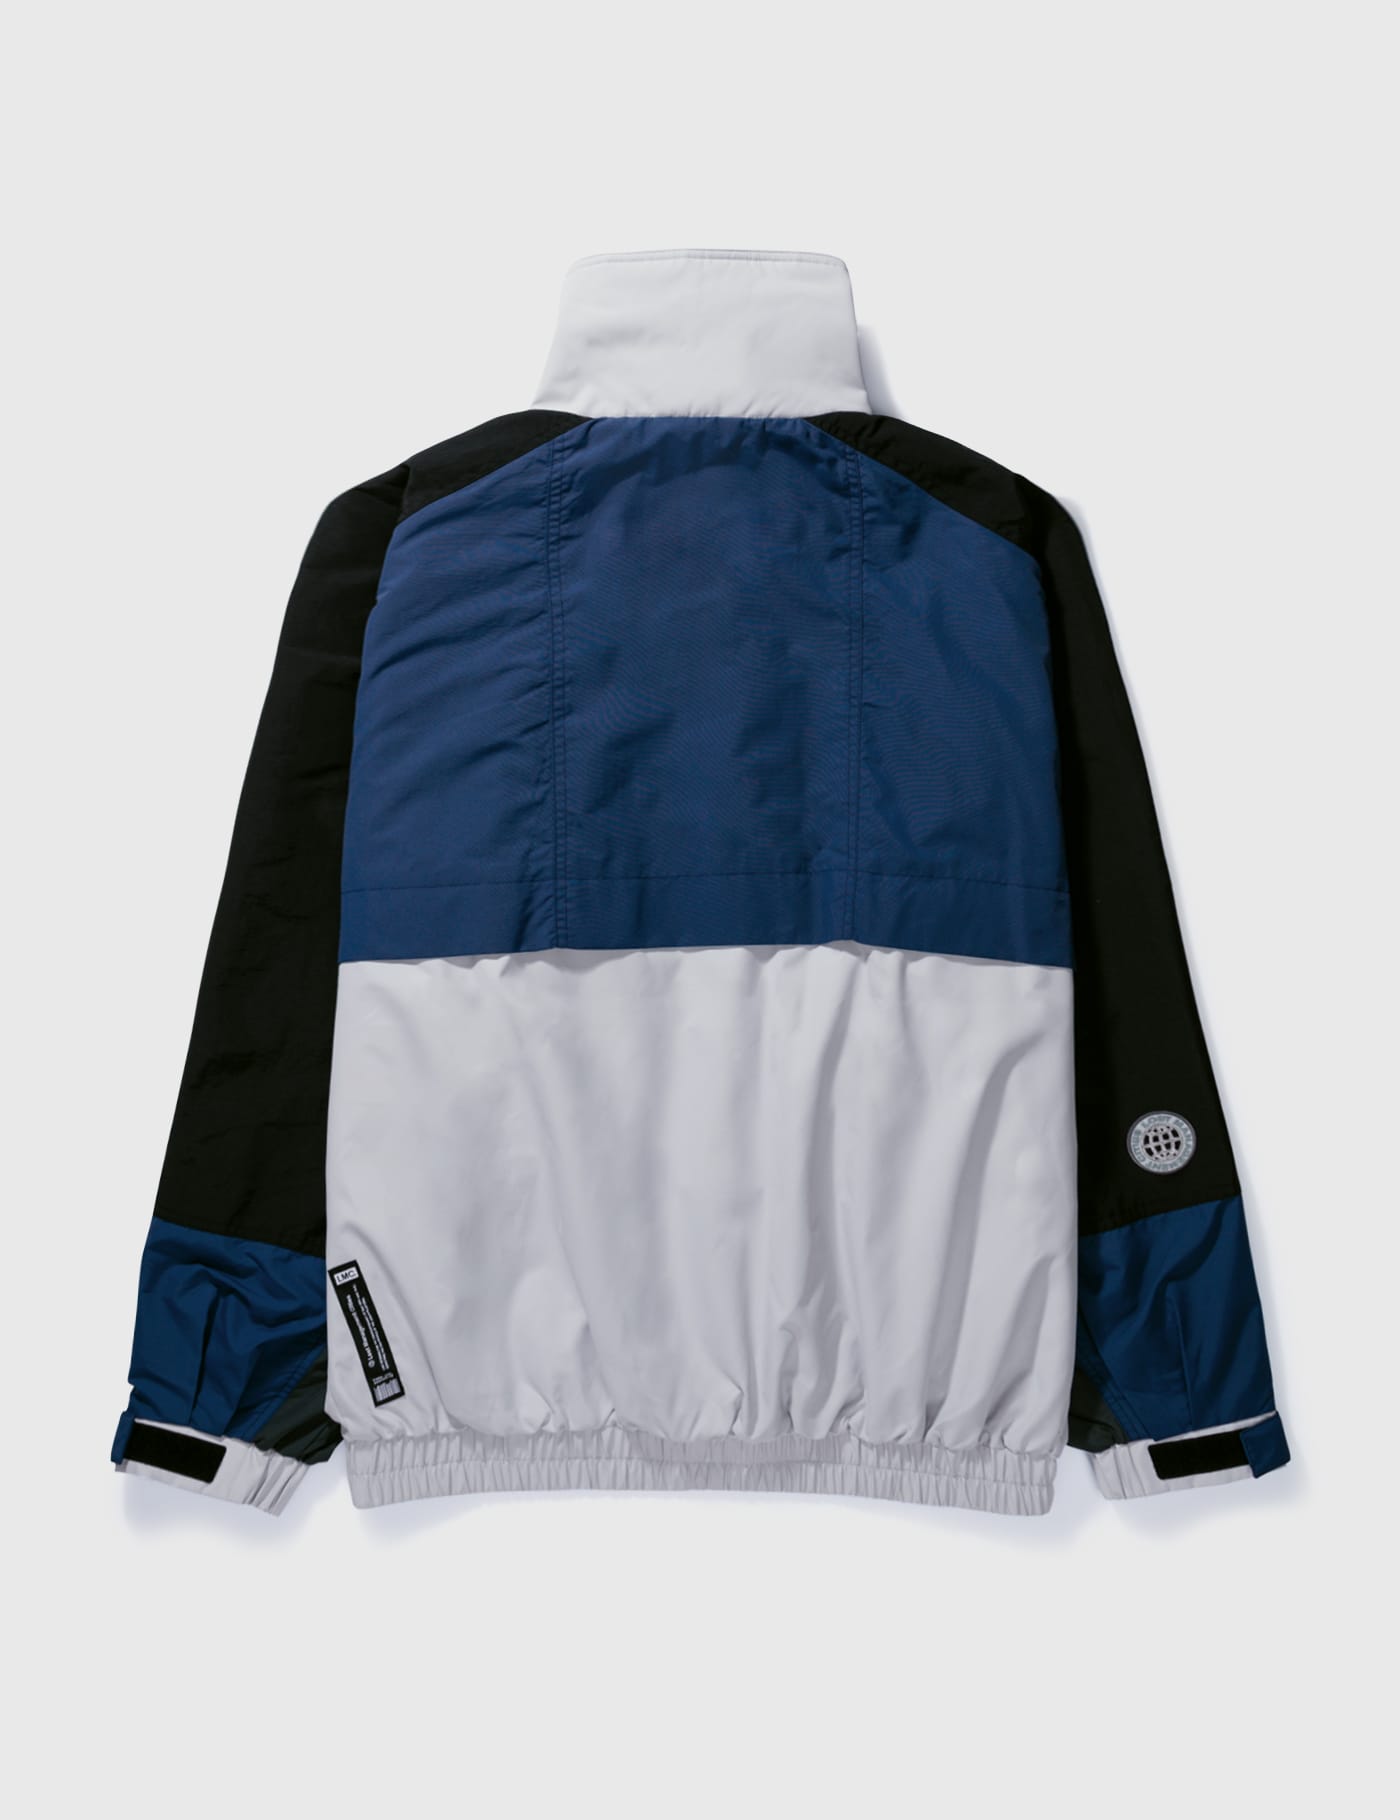 LMC - LMC GY2 Extreme Jacket | HBX - Globally Curated Fashion and Lifestyle  by Hypebeast